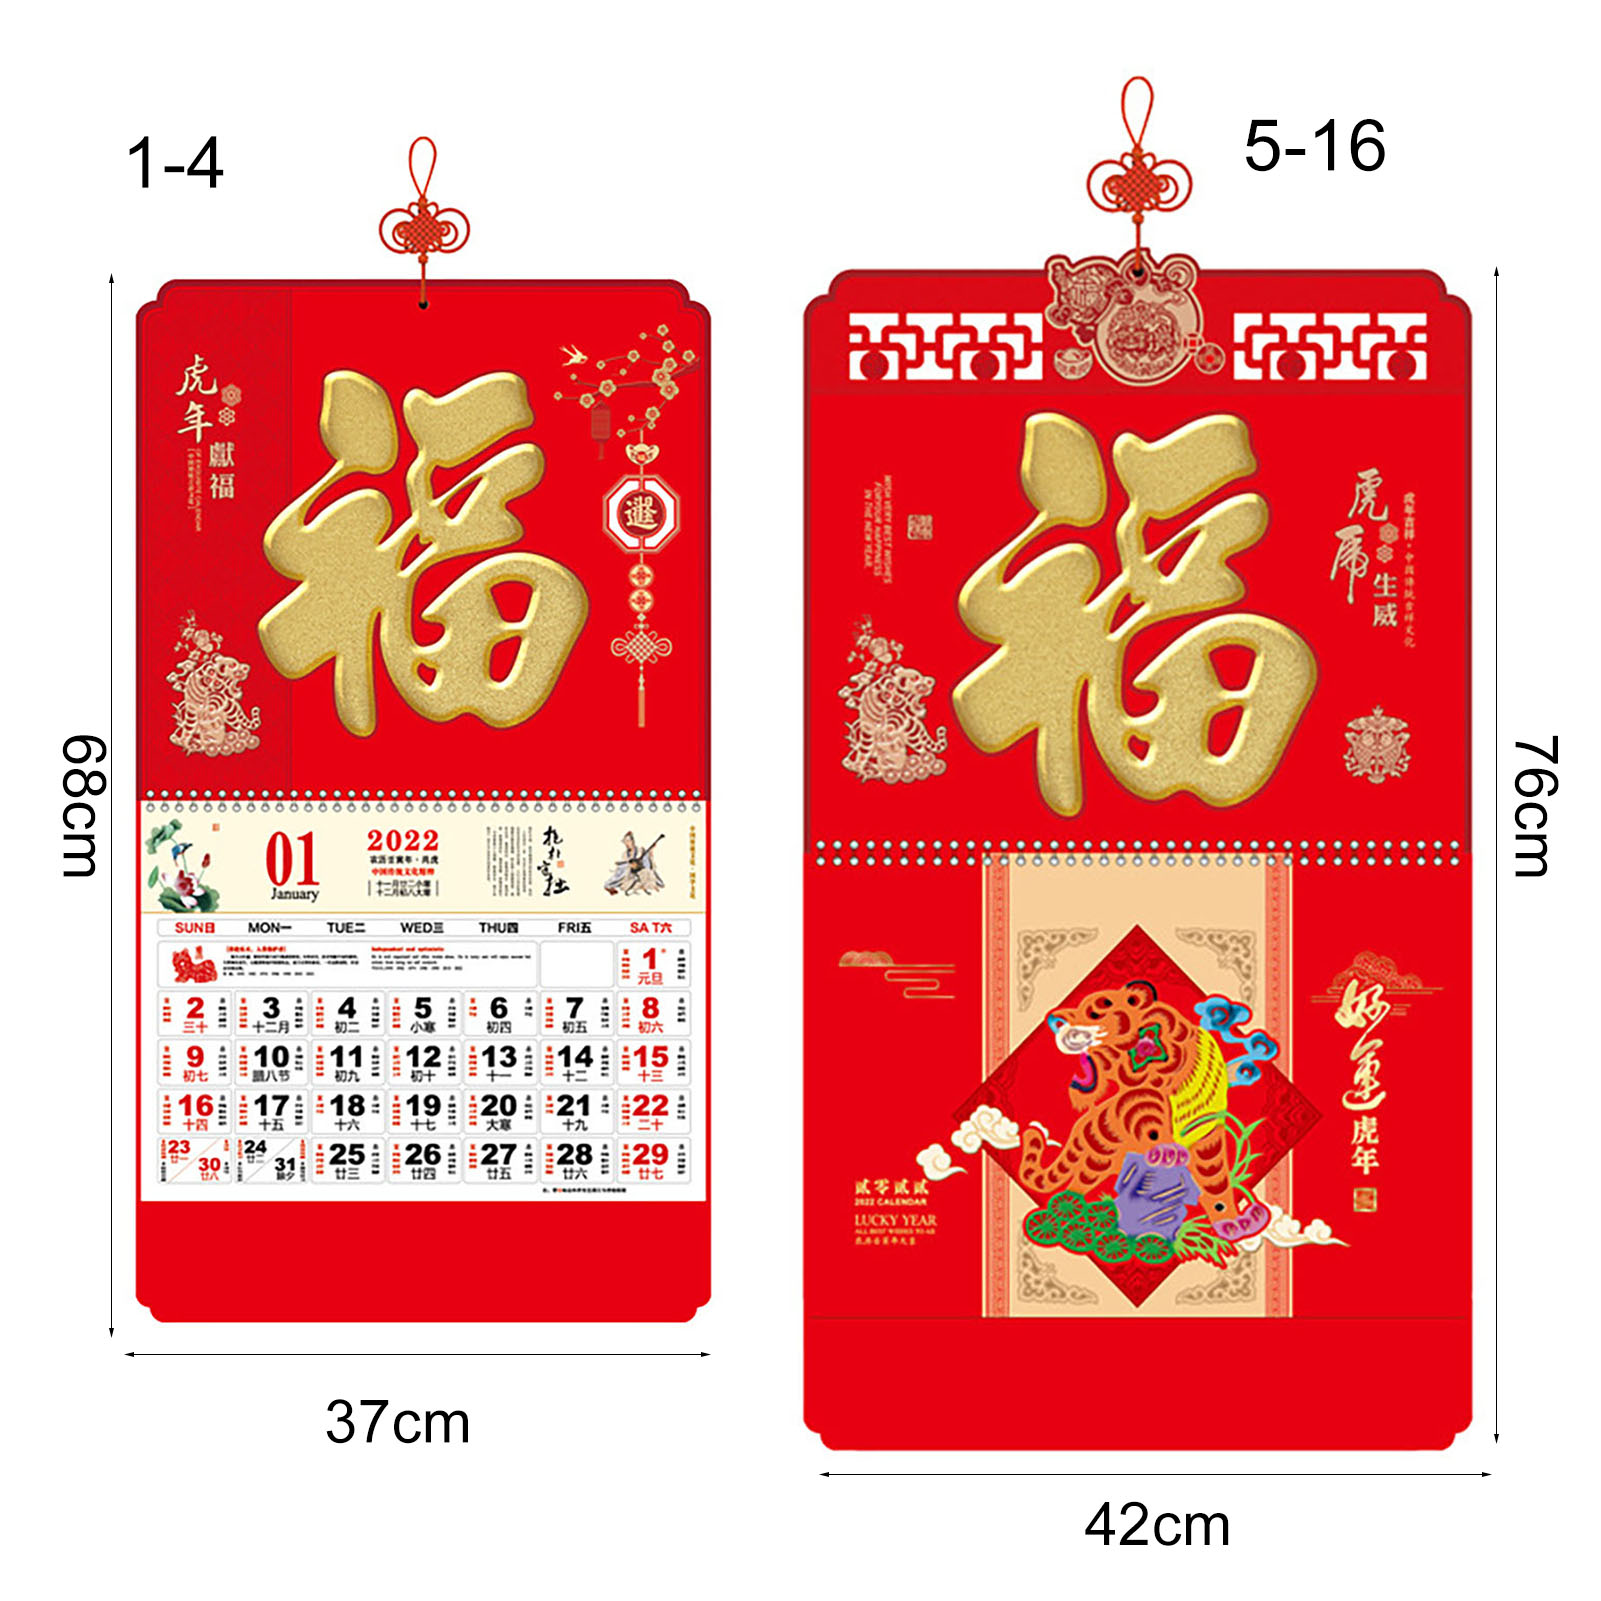 Chinese Calendar Decorative 2022 Propitious Hot Stamping Hanging Calendar: Buy Online At Best Prices In Pakistan | Daraz.pk